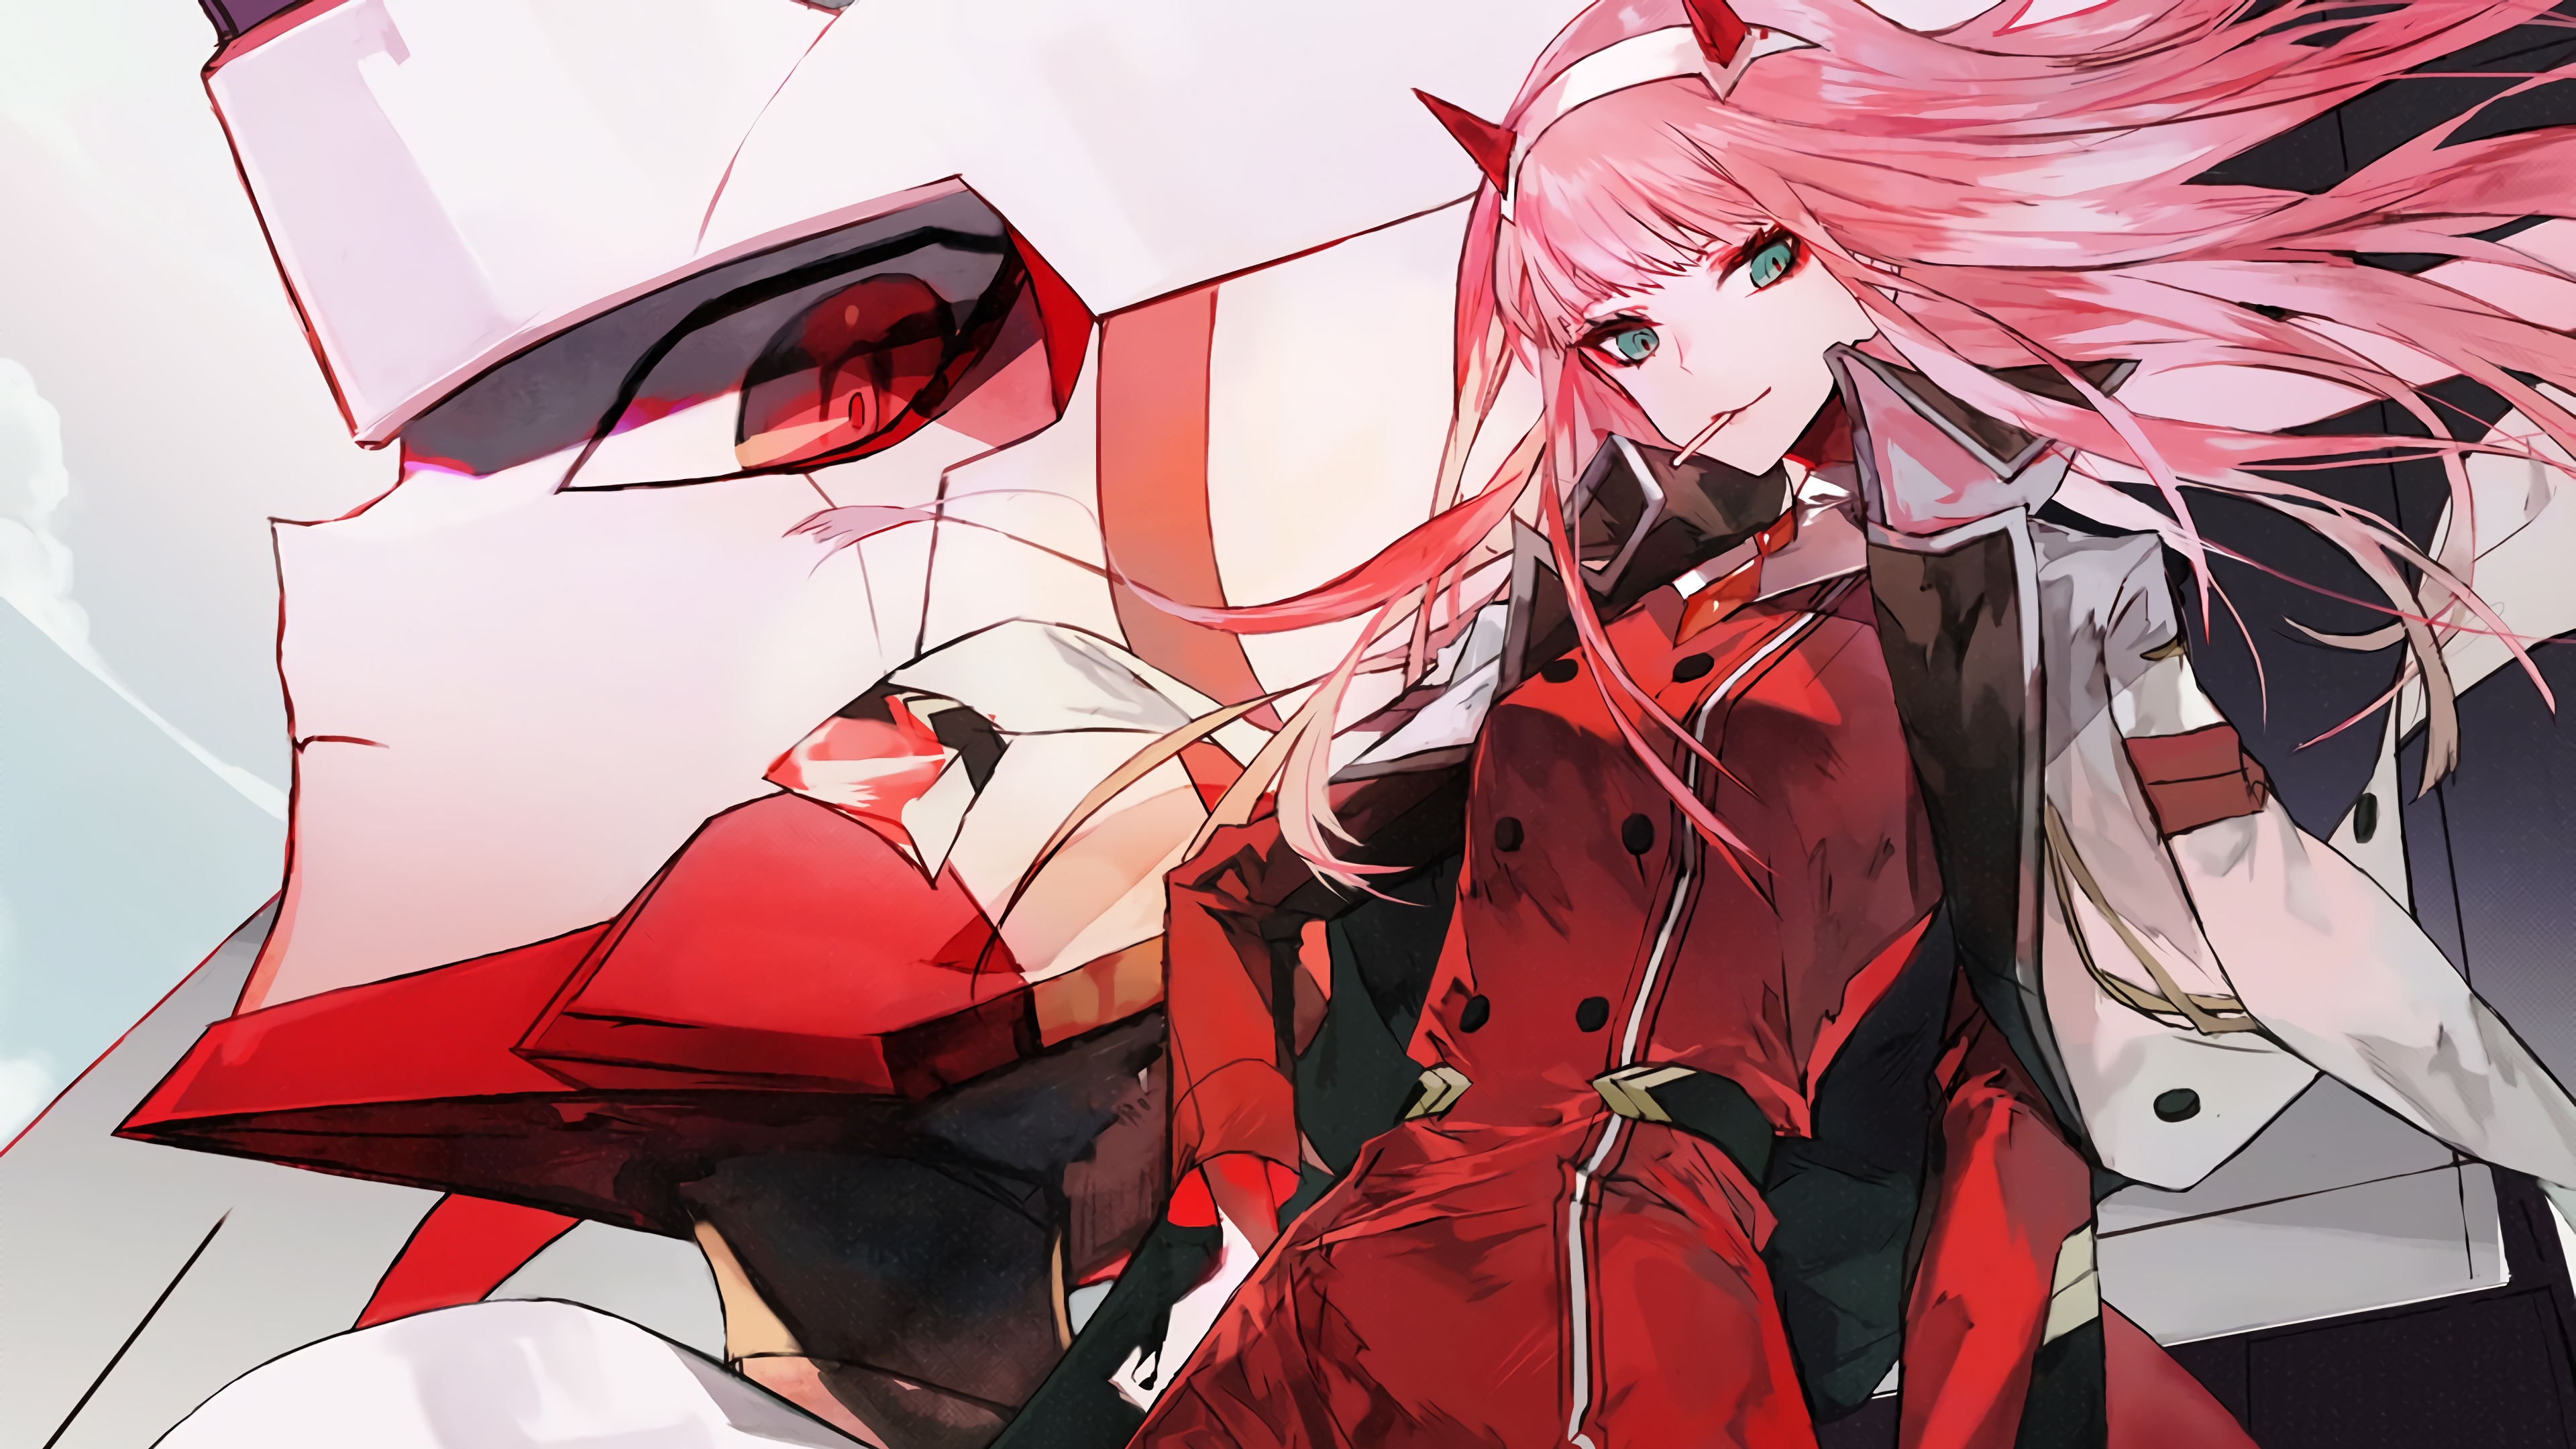 Anime 3840x2160 Darling in the FranXX Zero Two (Darling in the FranXX) anime girls pink hair red jackets white jacket mecha girls horns oni girl